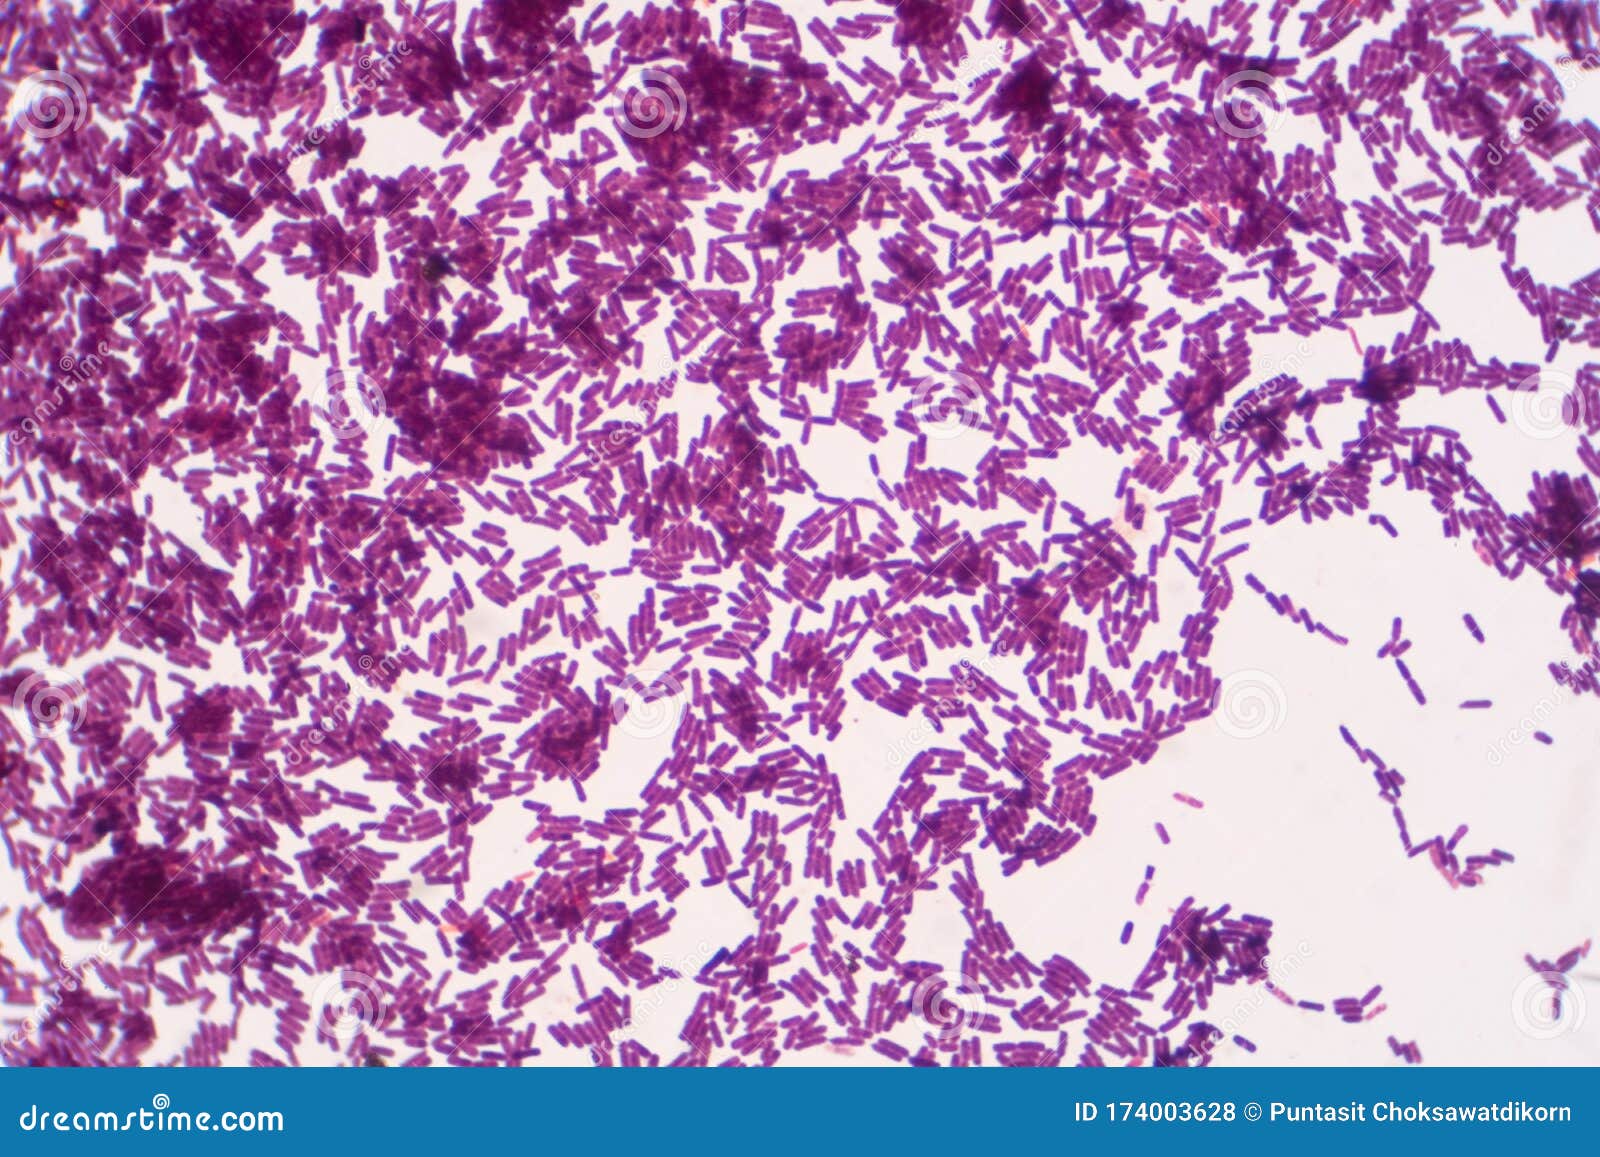 bacillus gram positive stain under microscope view. bacillus is rod-d bacteria